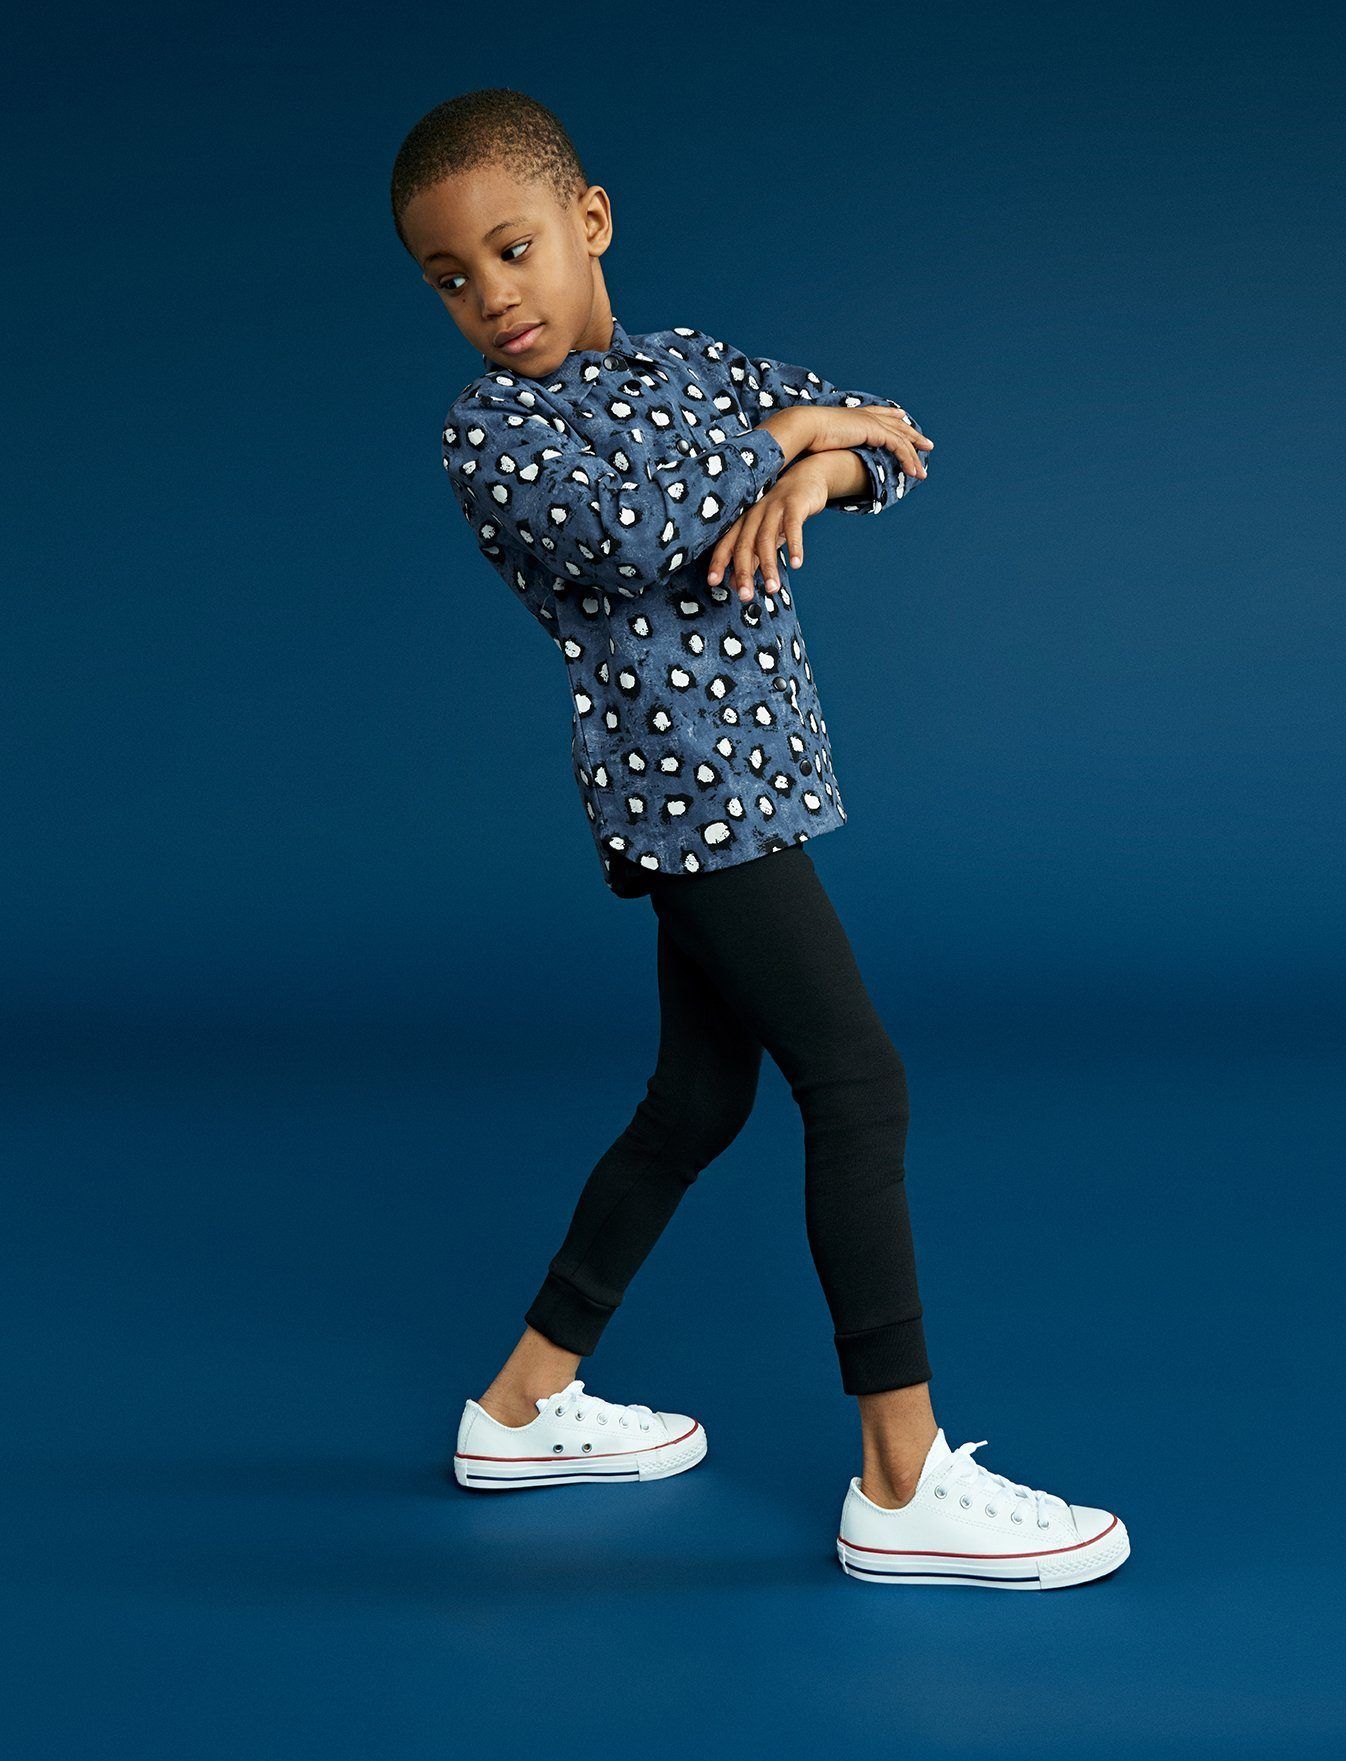 Slim fitting lightweight cotton shirt with our bespoke painted dot print in navy with black and white dots. Features front pockets and press stud front opening for ease of dressing. Shown here with our black ribbed leggings and all week casual sneakers. Designed to be unisex.